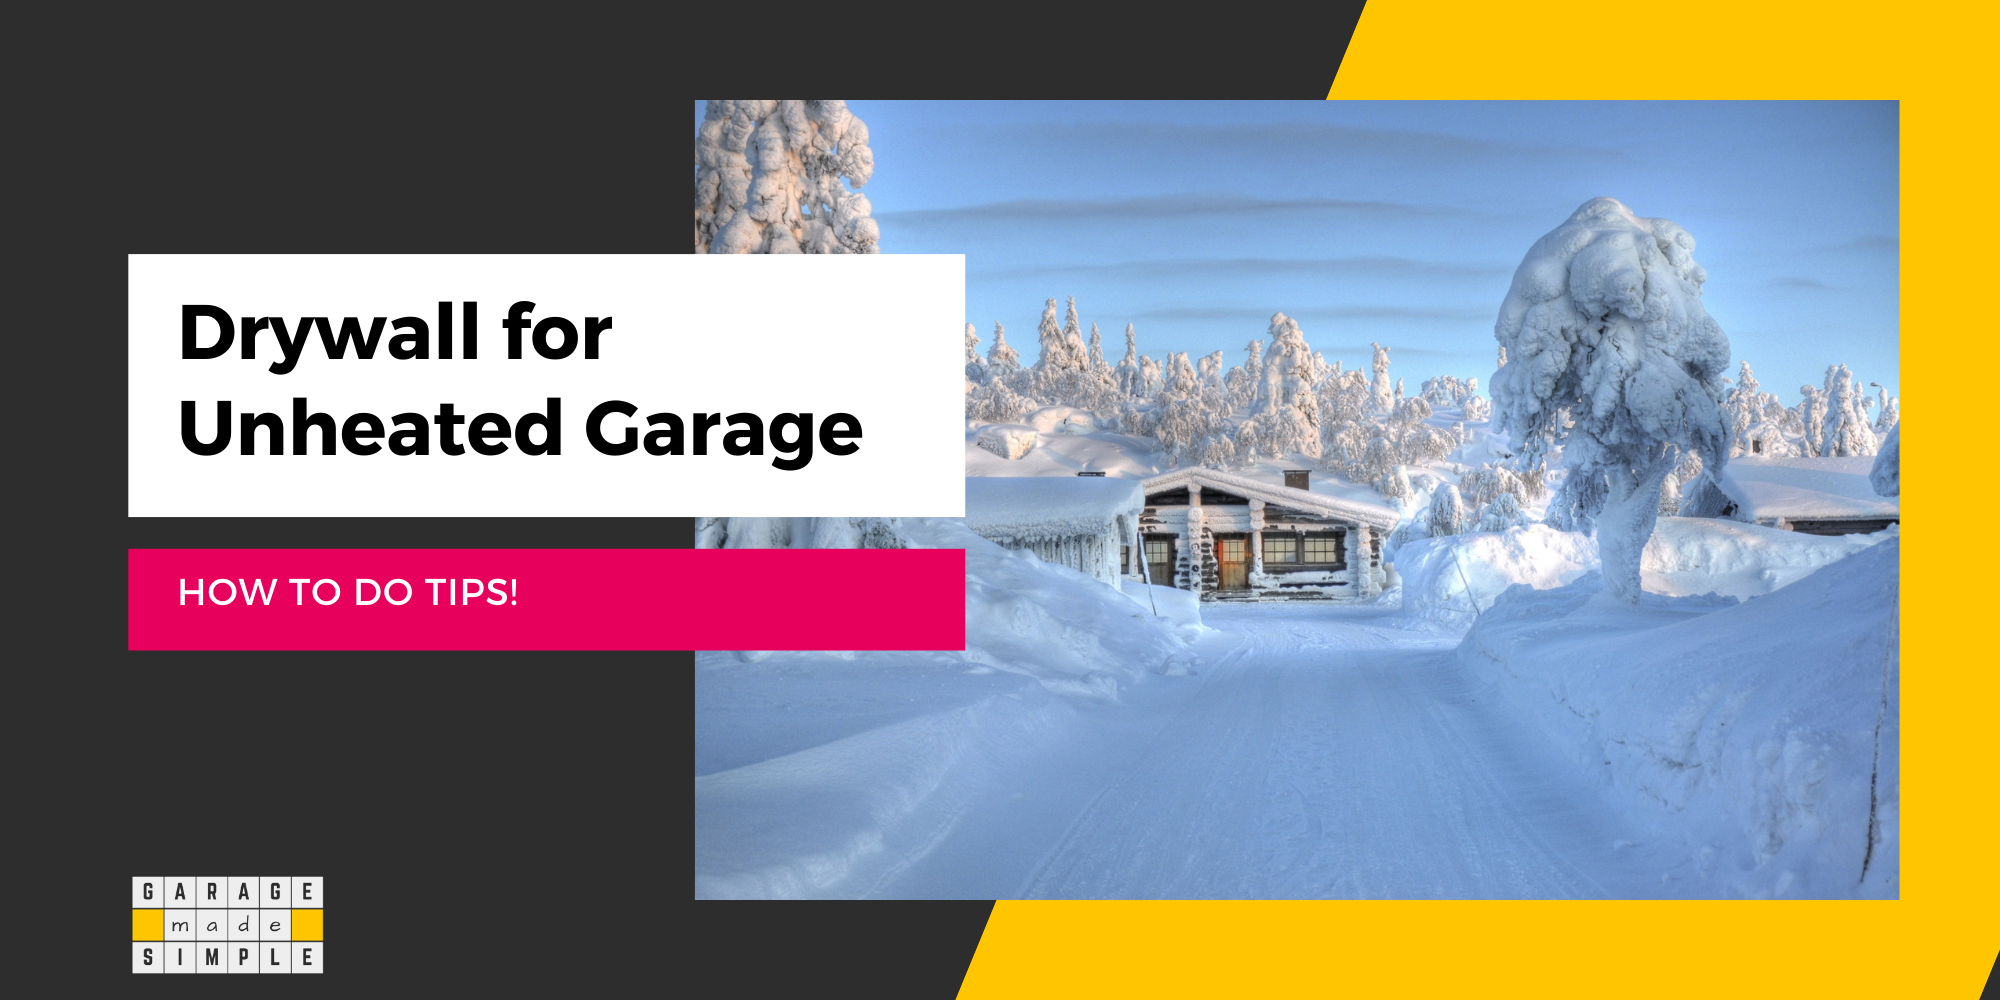 Can You Drywall An Unheated Garage? (Super Helpful “How To” Tips!)